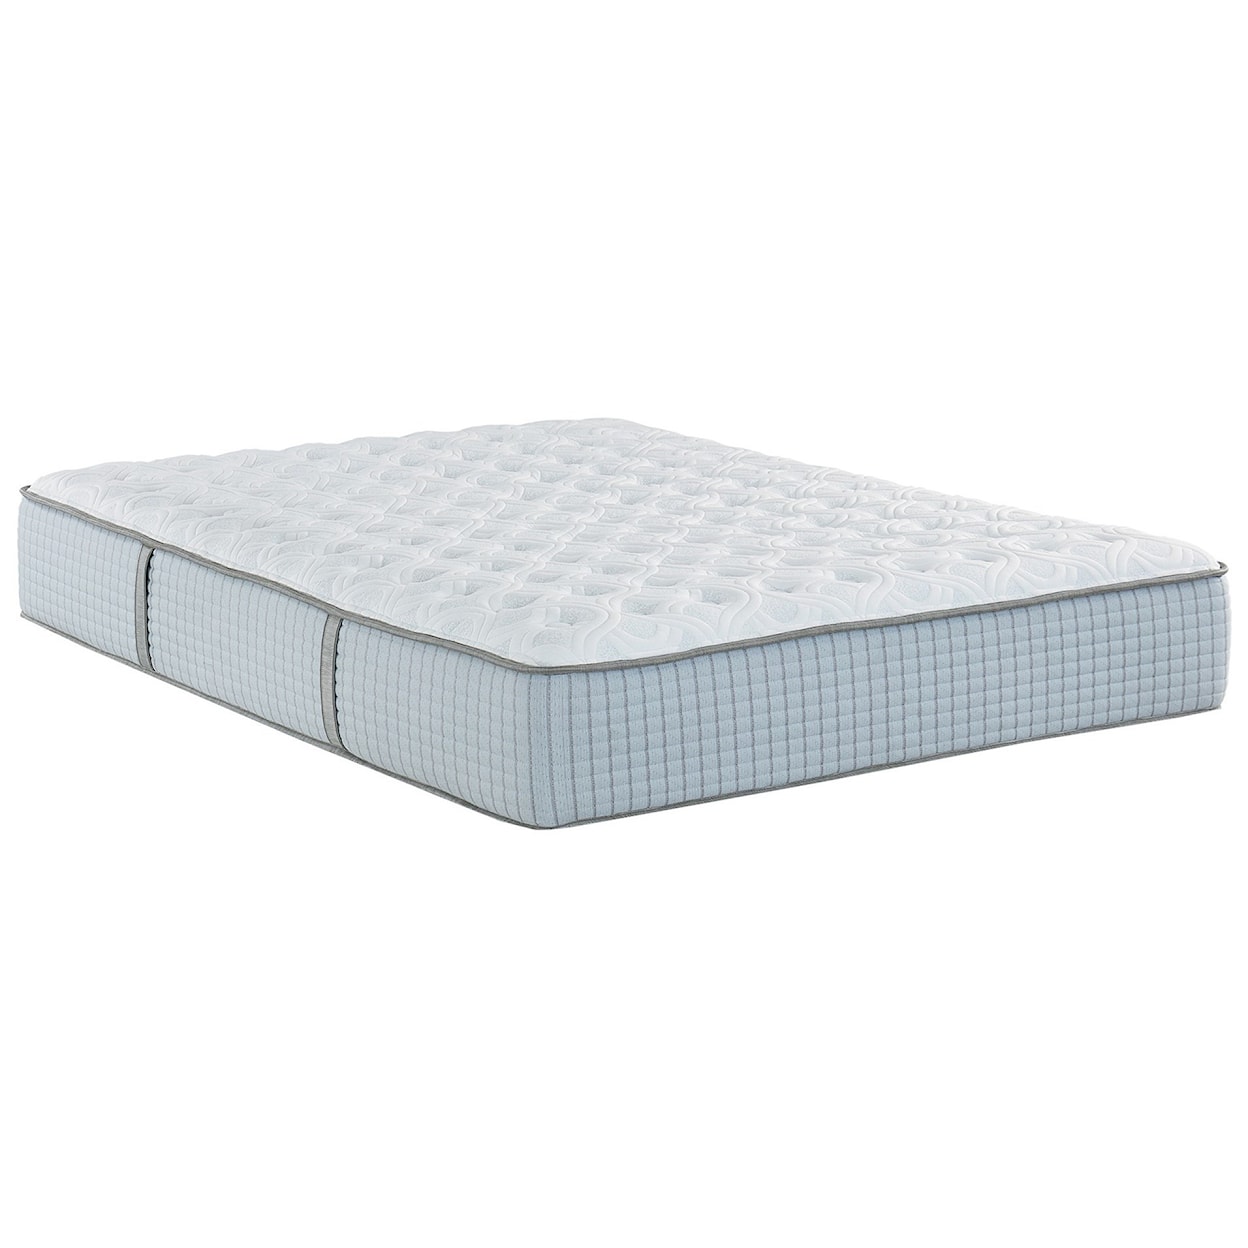 Restonic Clarion IV Luxury Plush and Luxury Firm Twin XL 2-Sided Firm / Plush Mattress